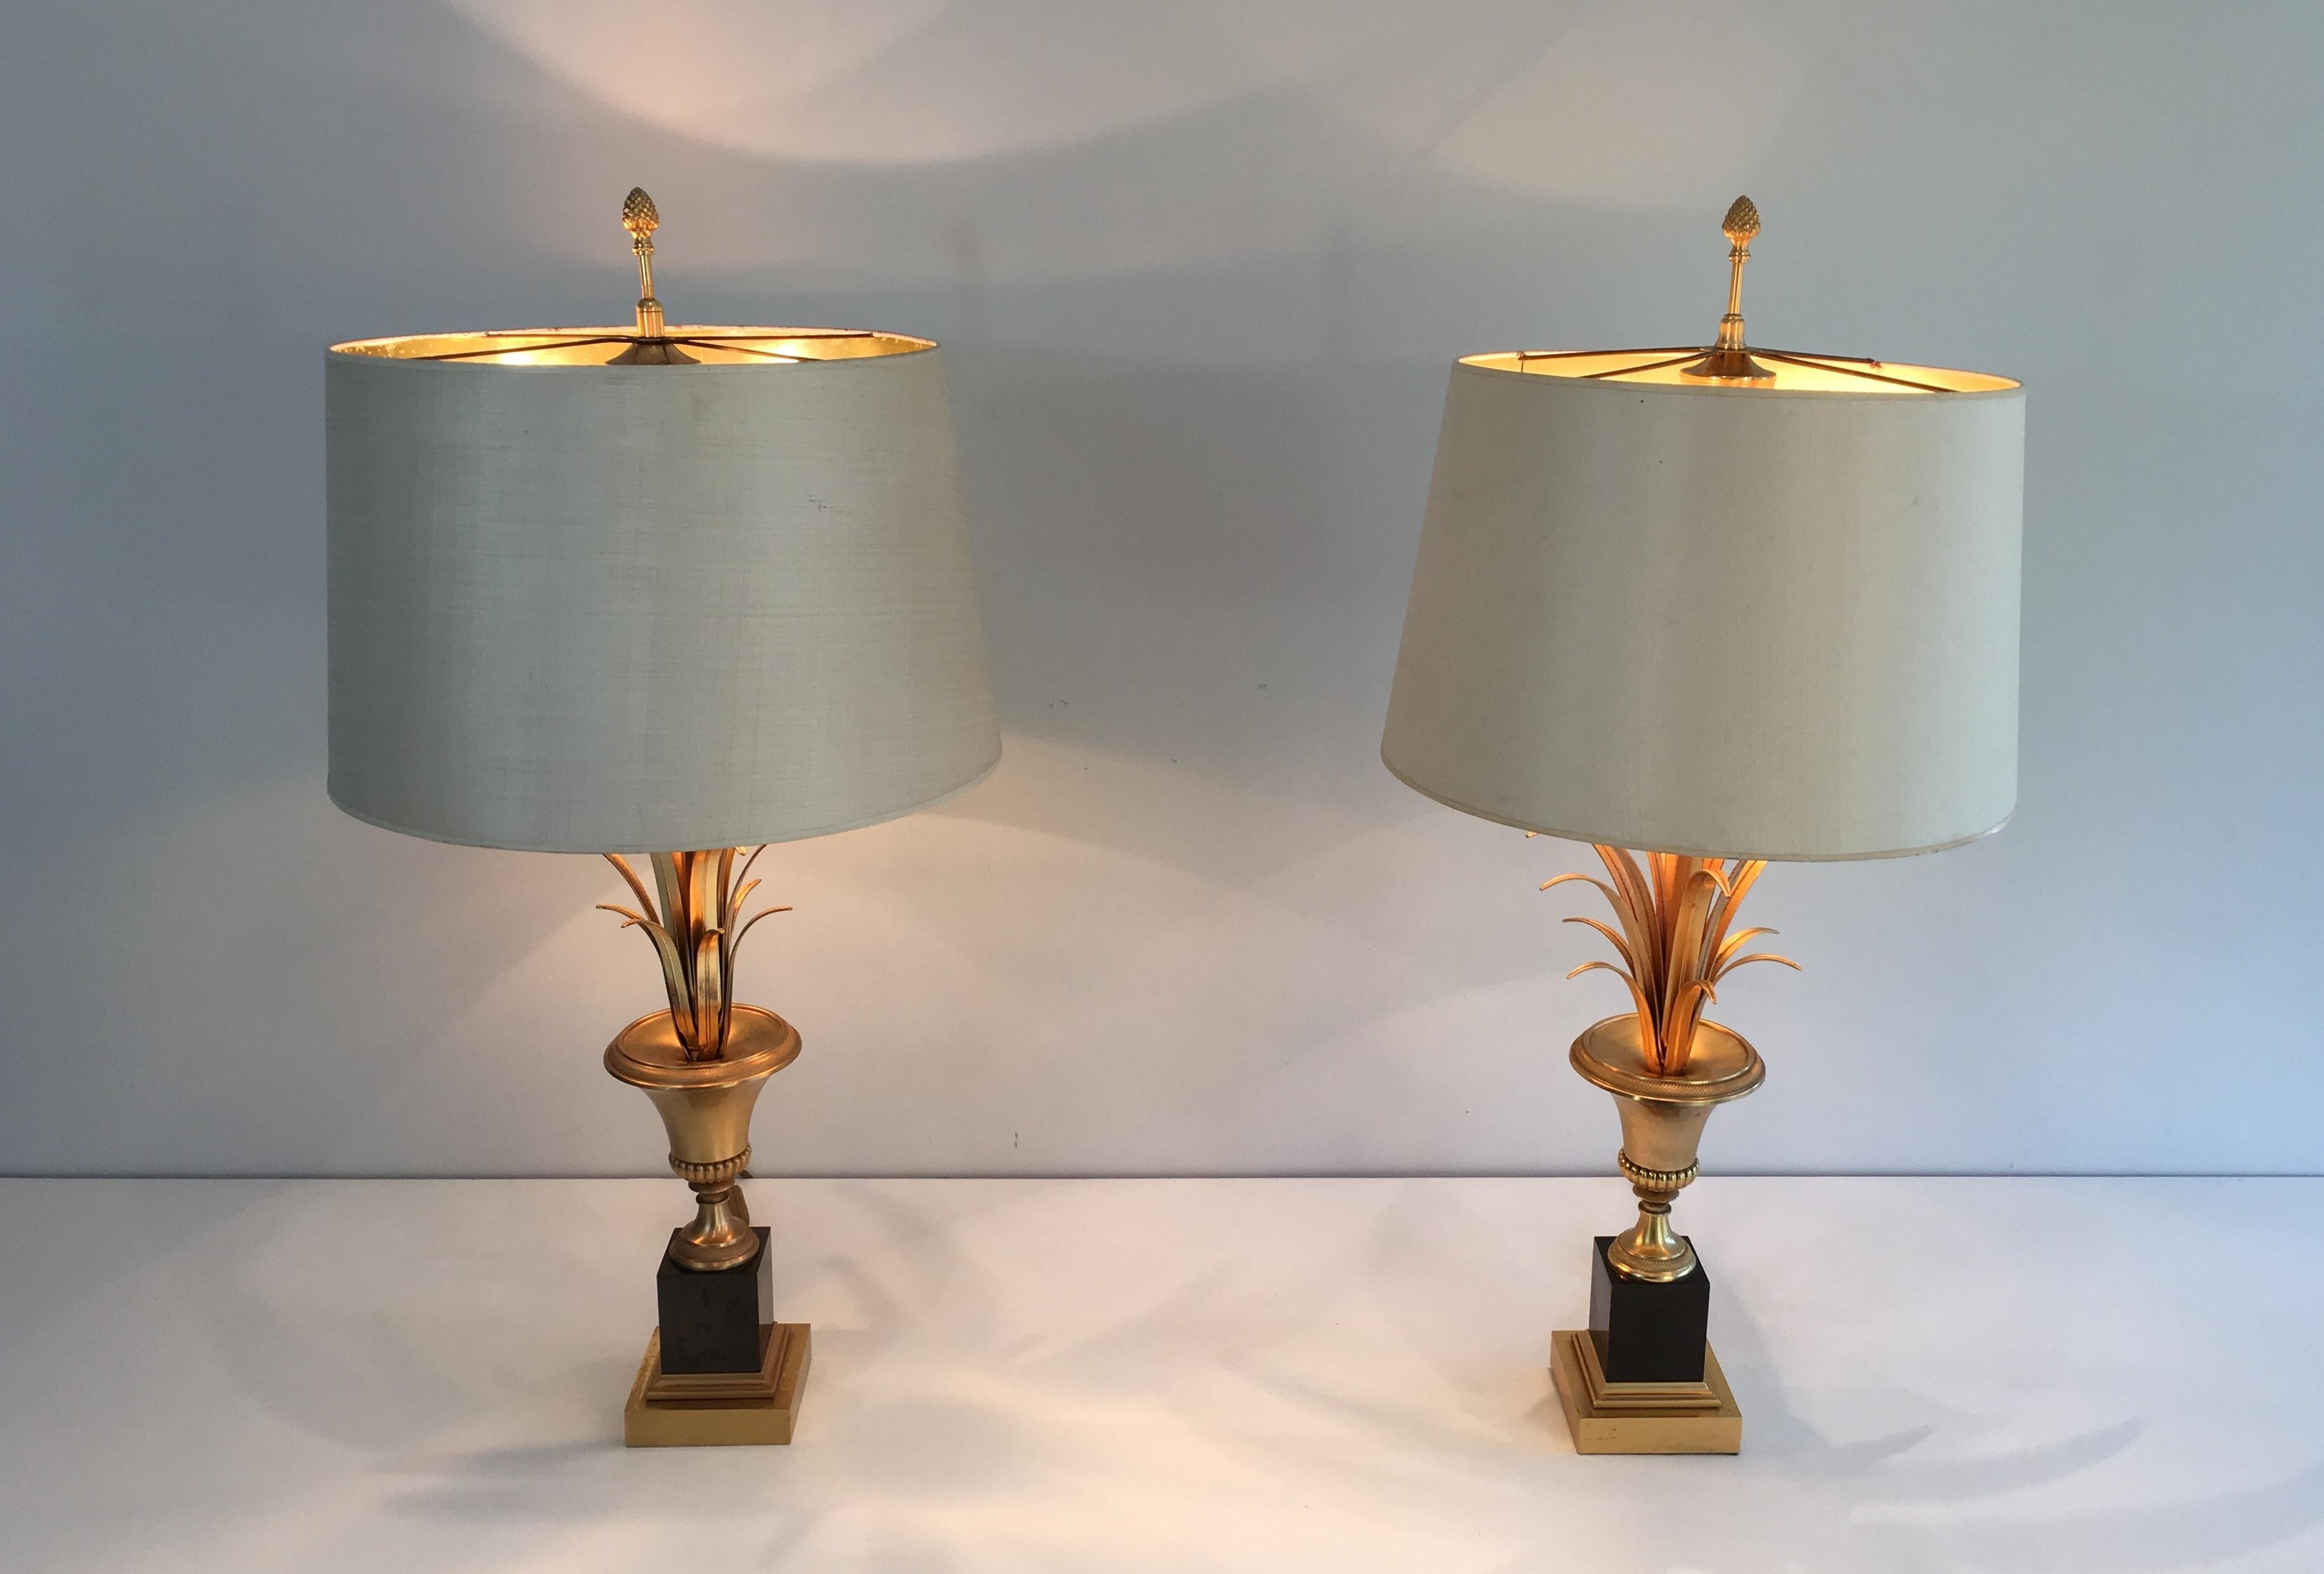 In the style of Maison Charles. Elegant pair of black lacquered and gold gilt nickel palm tree table lamps. French, circa 1970.